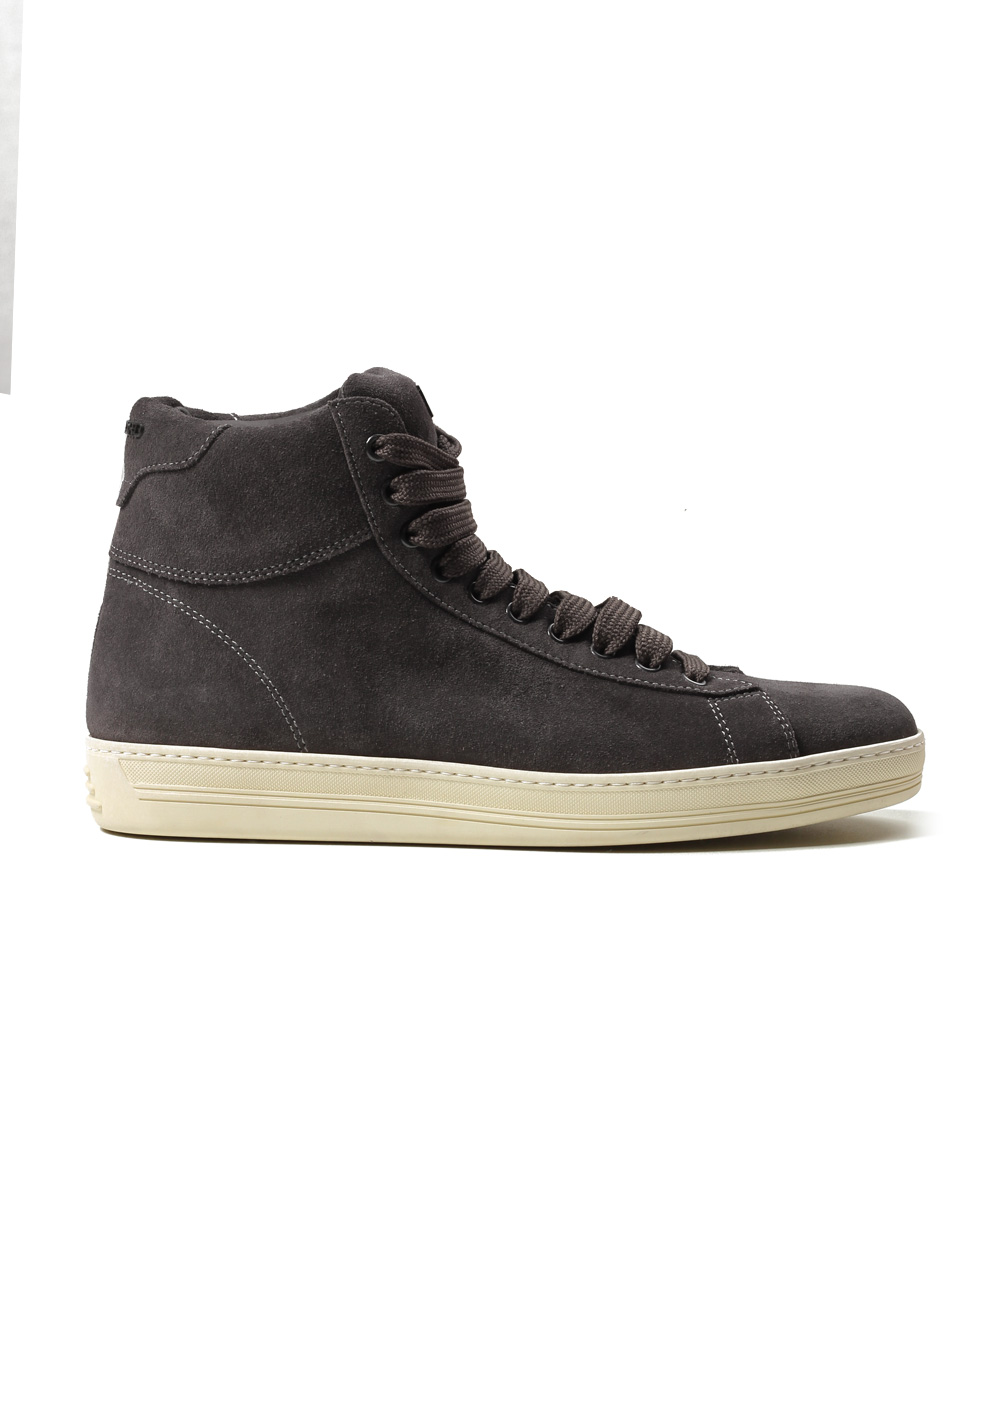 TOM FORD Russel High Top Gray Suede Sneaker Shoes Size 7.5 UK / 8.5 U.S. | Costume Limité